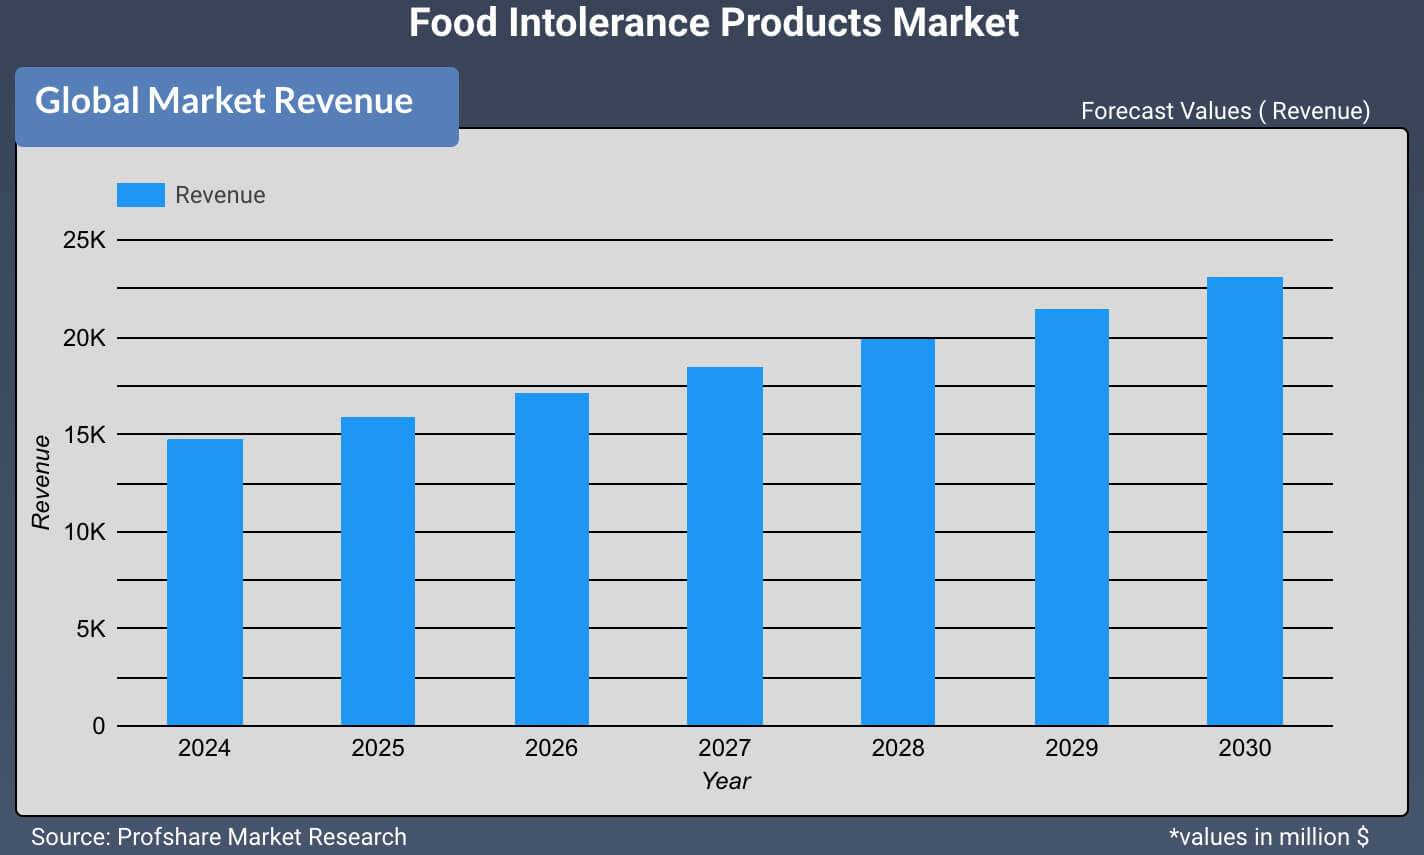 Food Intolerance Products Market